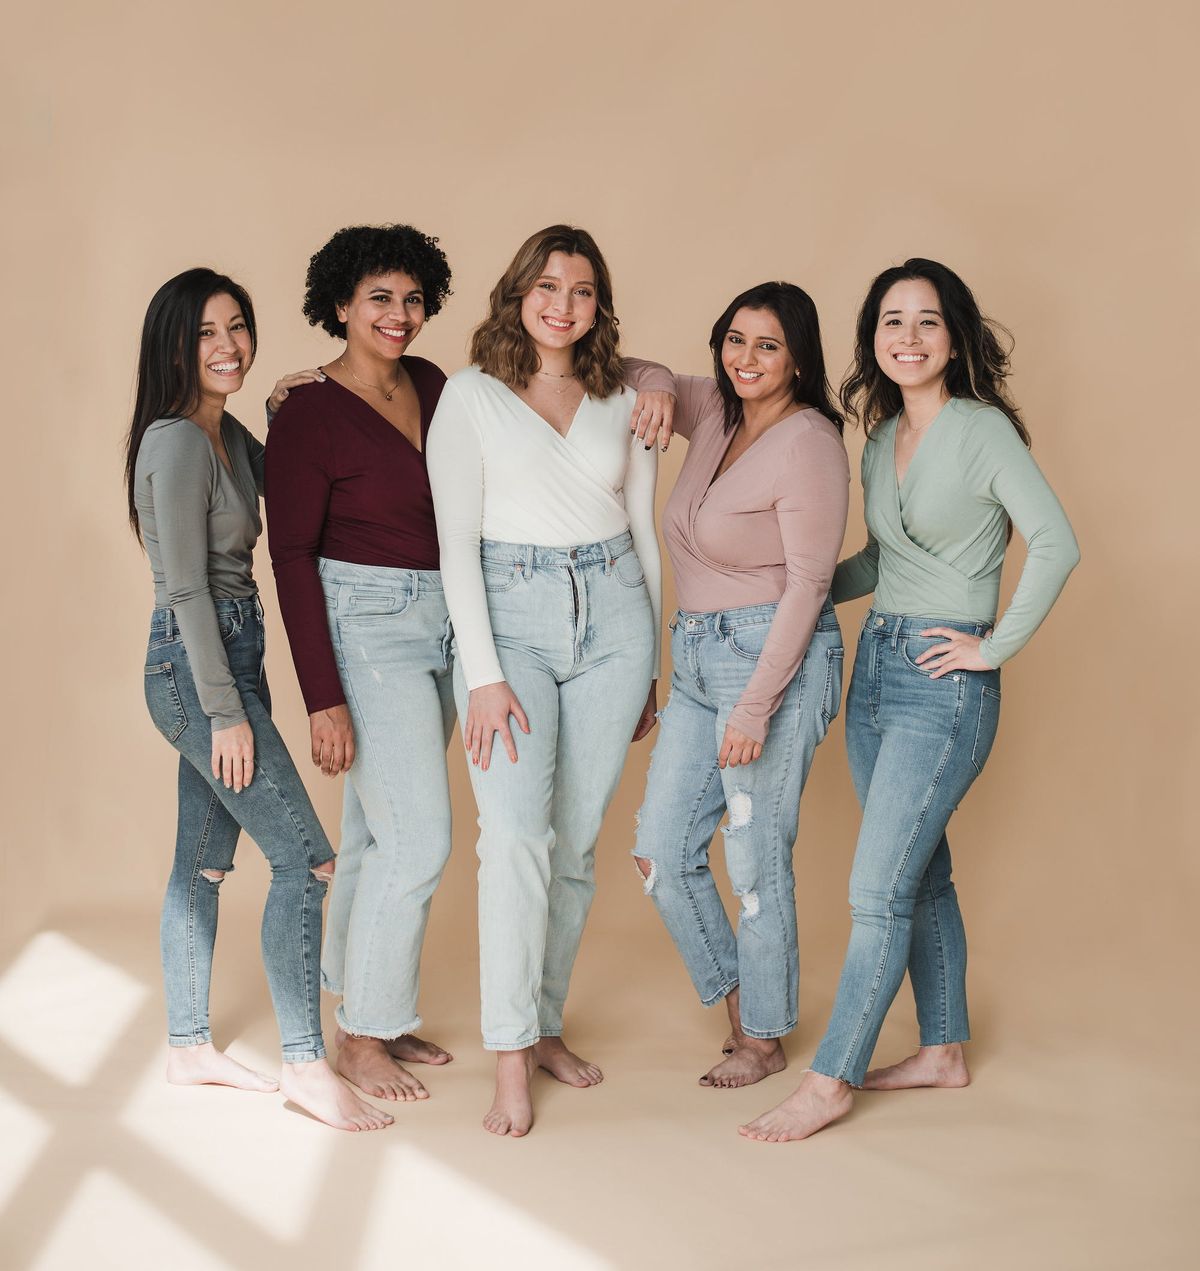 Flattering Jeans to Conceal and Complement Your Body